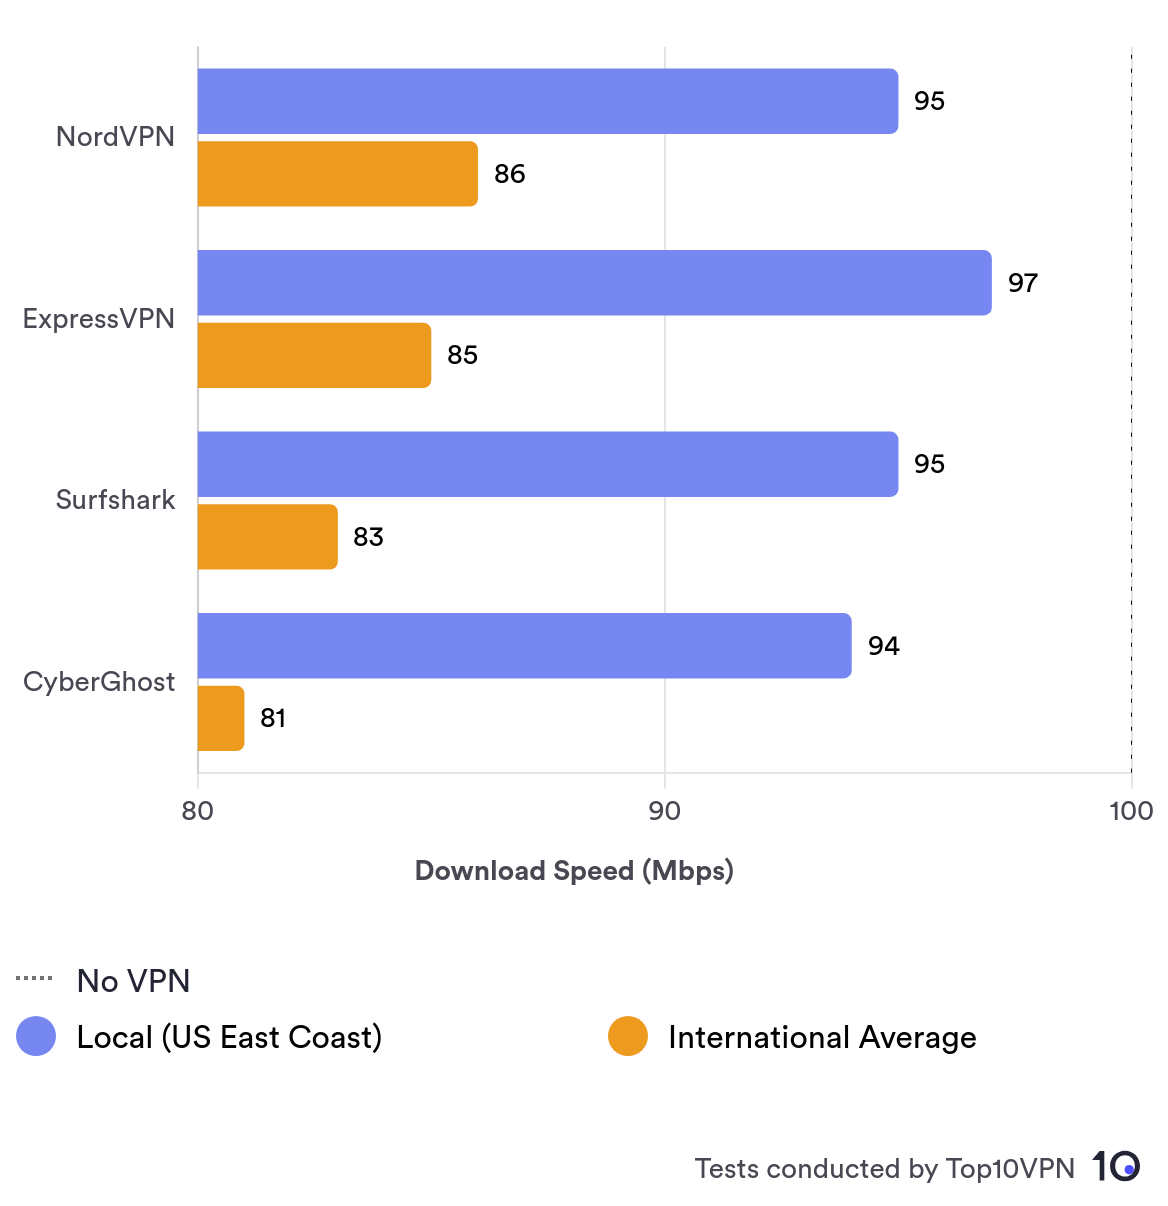 Chart comparing NordVPN's speeds to 3 other VPN services